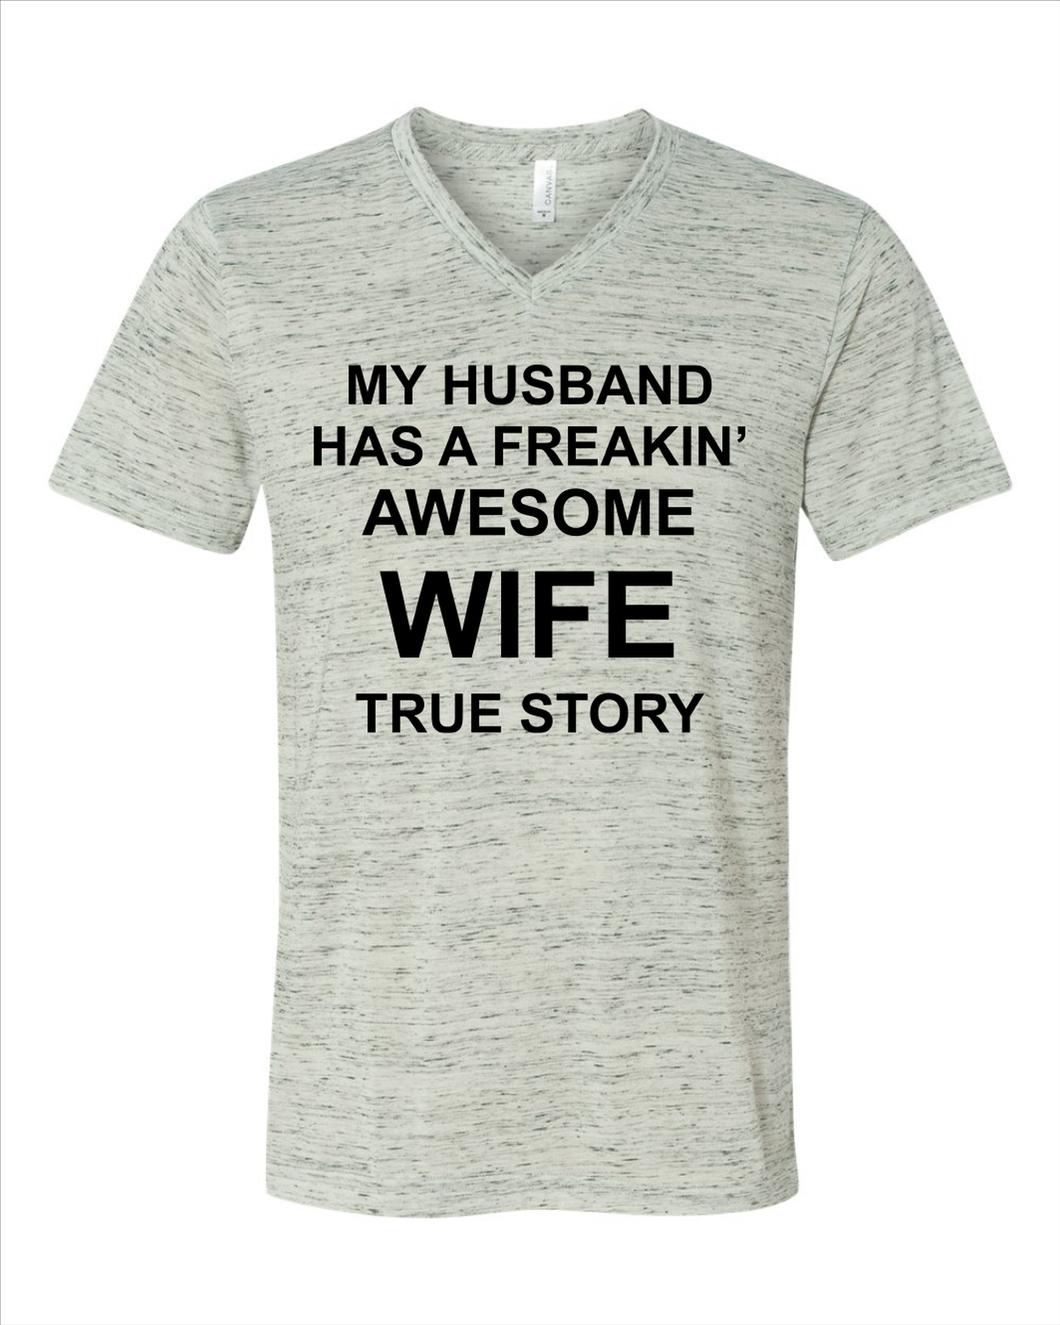 Awesome Wife T-shirt